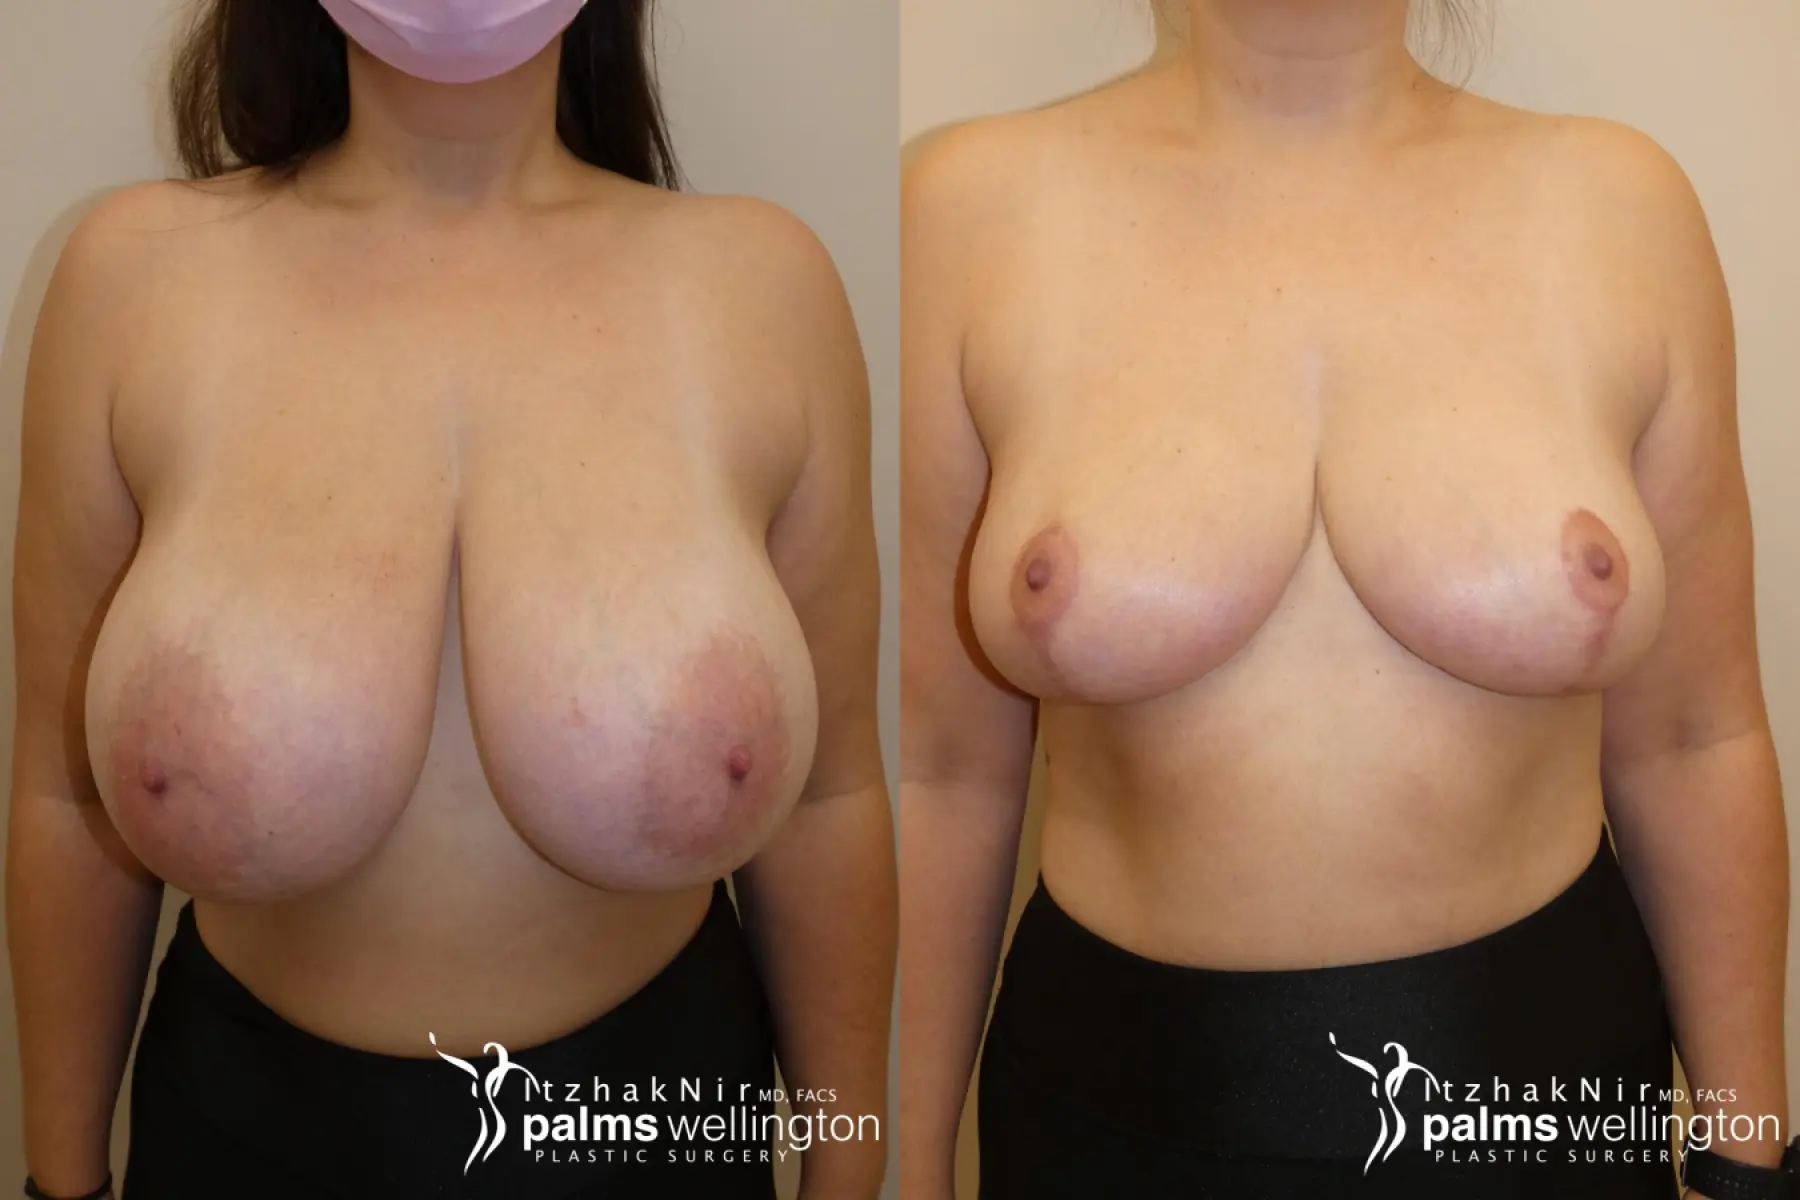 Breast Reduction WestPalmBeach - Before and After